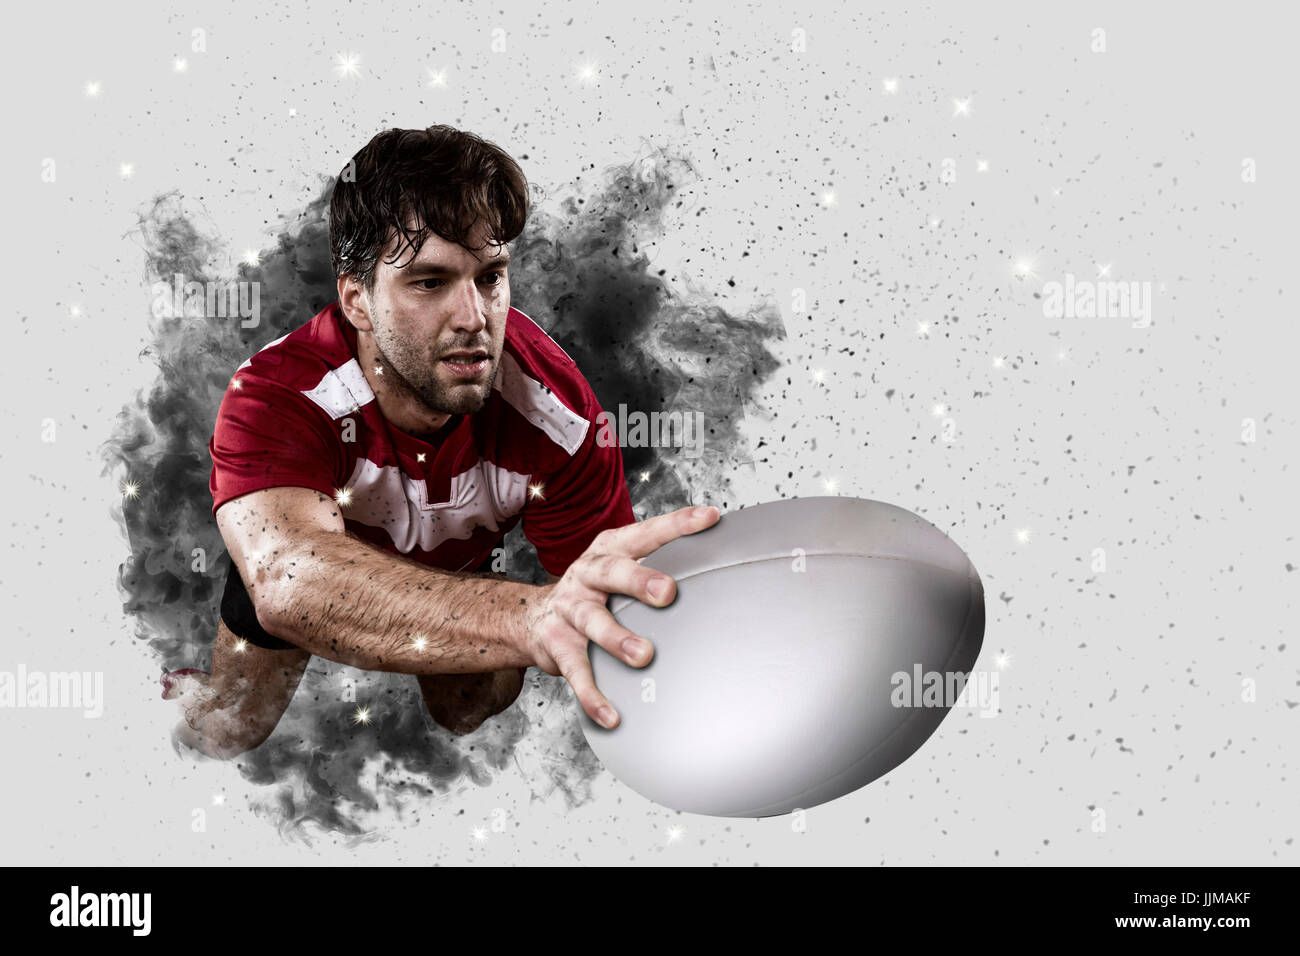 Rugby Player with a red uniform coming out of a blast of smoke . Stock Photo